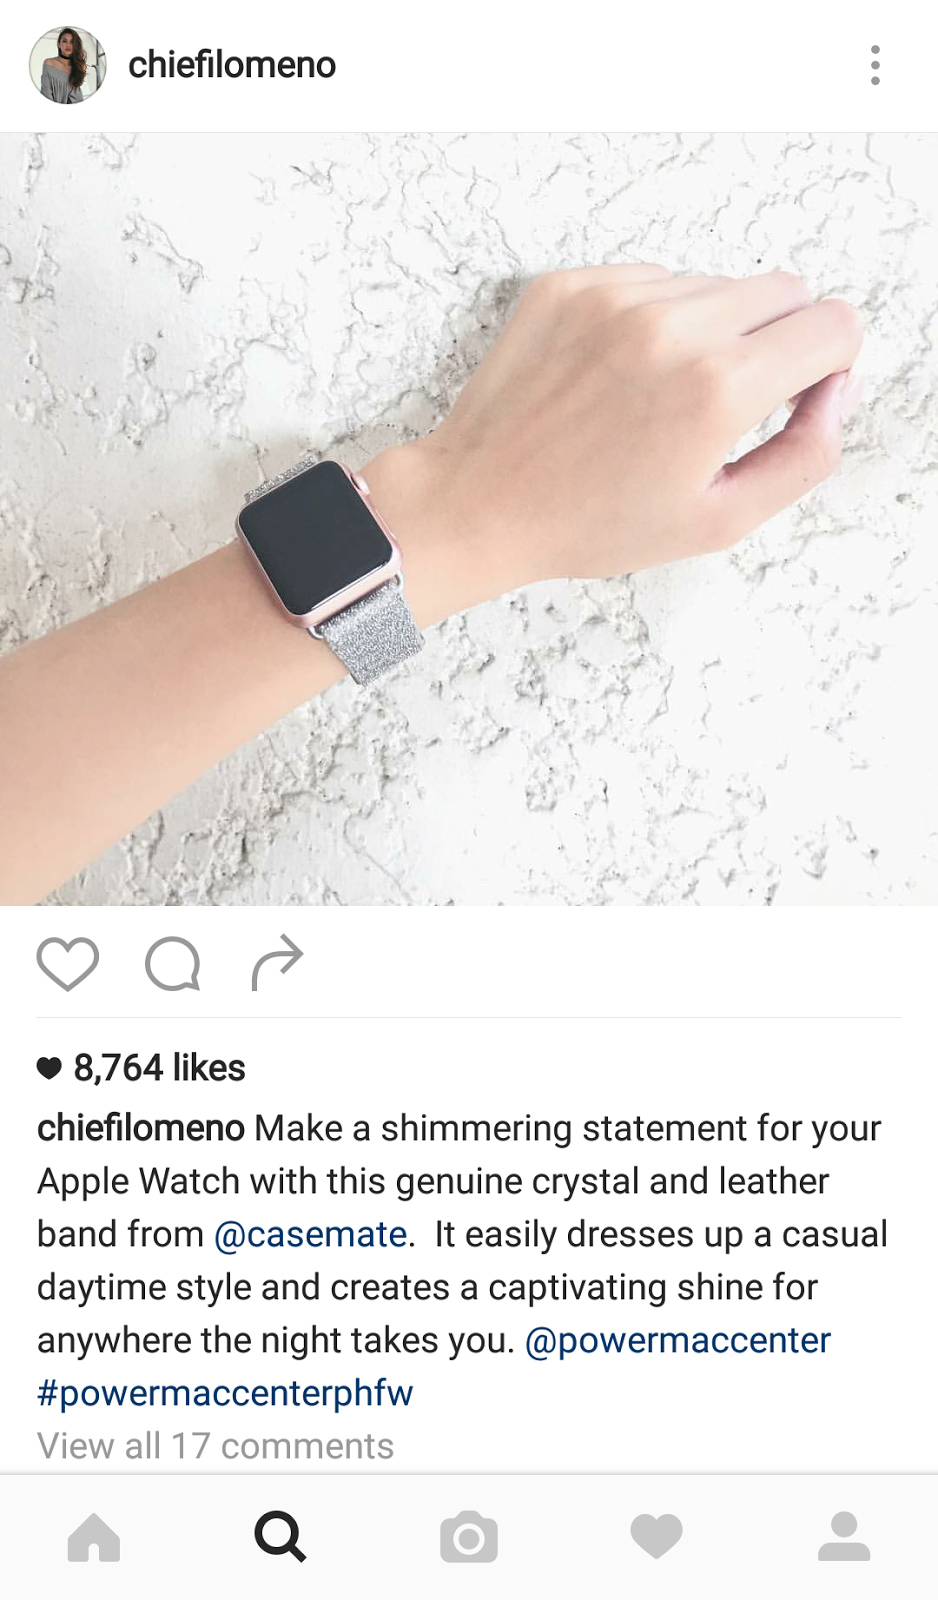 Case-Mate Apple Watch bands are available at Power Mac Center stores nationwide